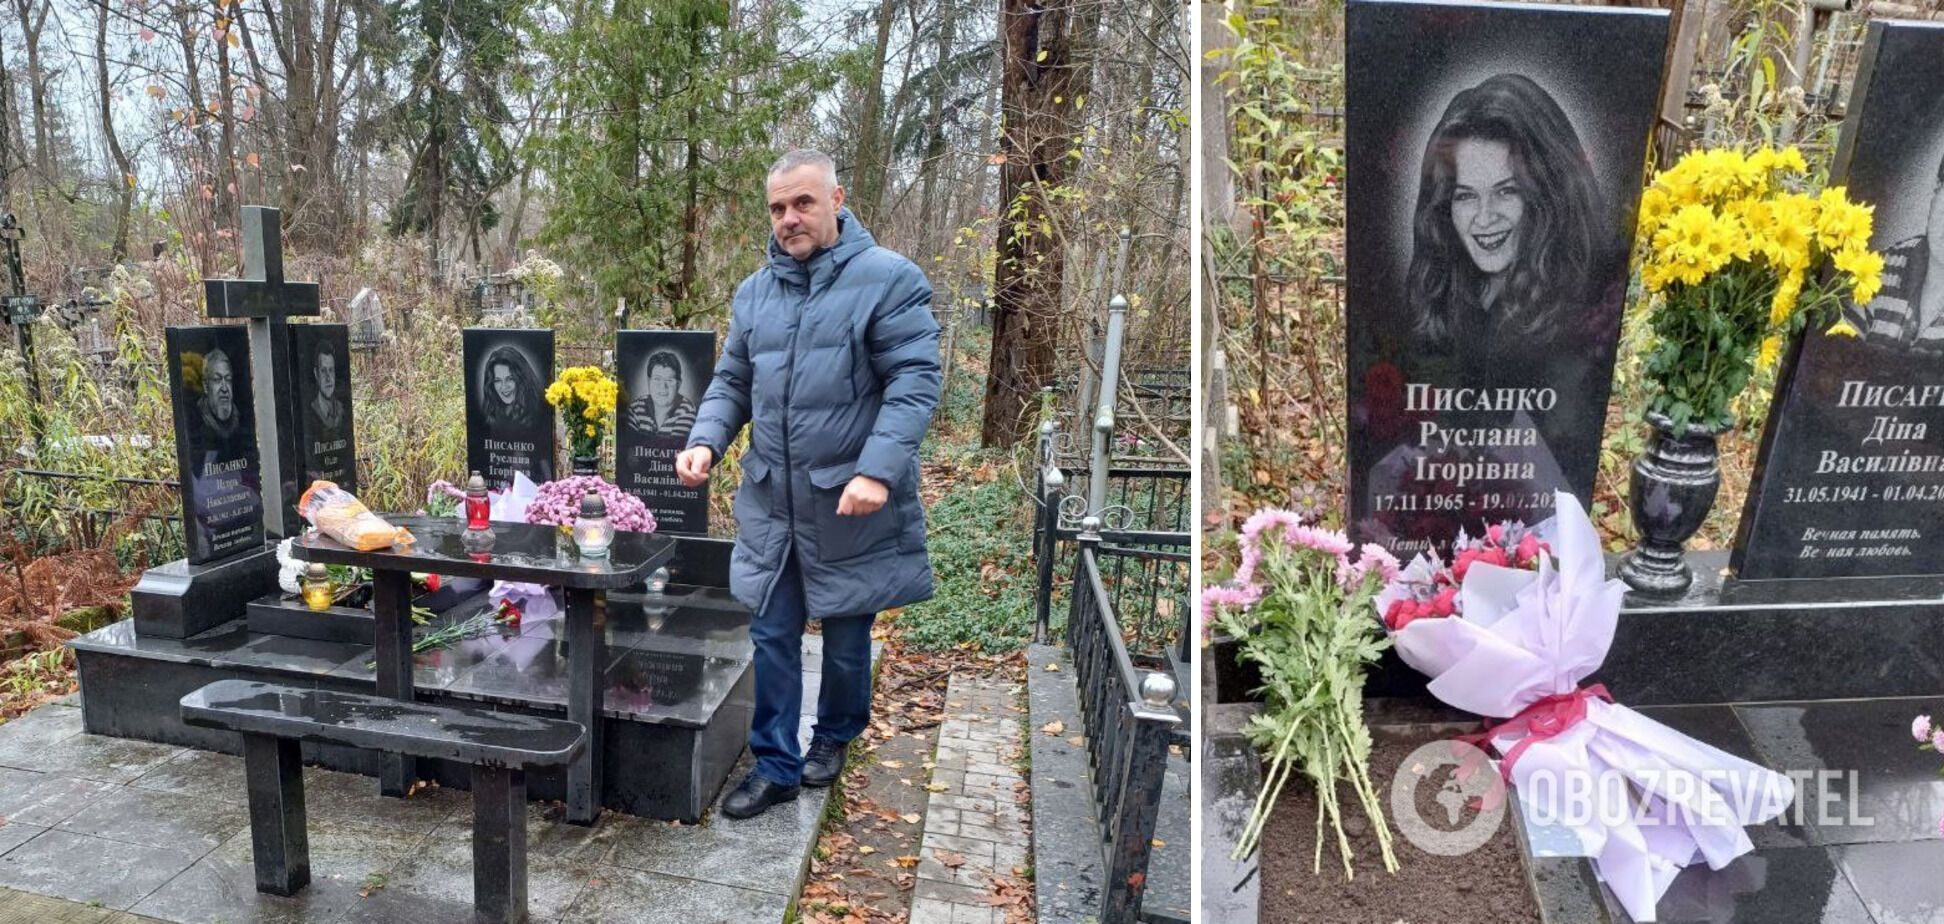 A monument has been placed on Ruslana Pysanka's grave: the actress would have turned 58. Exclusive photos